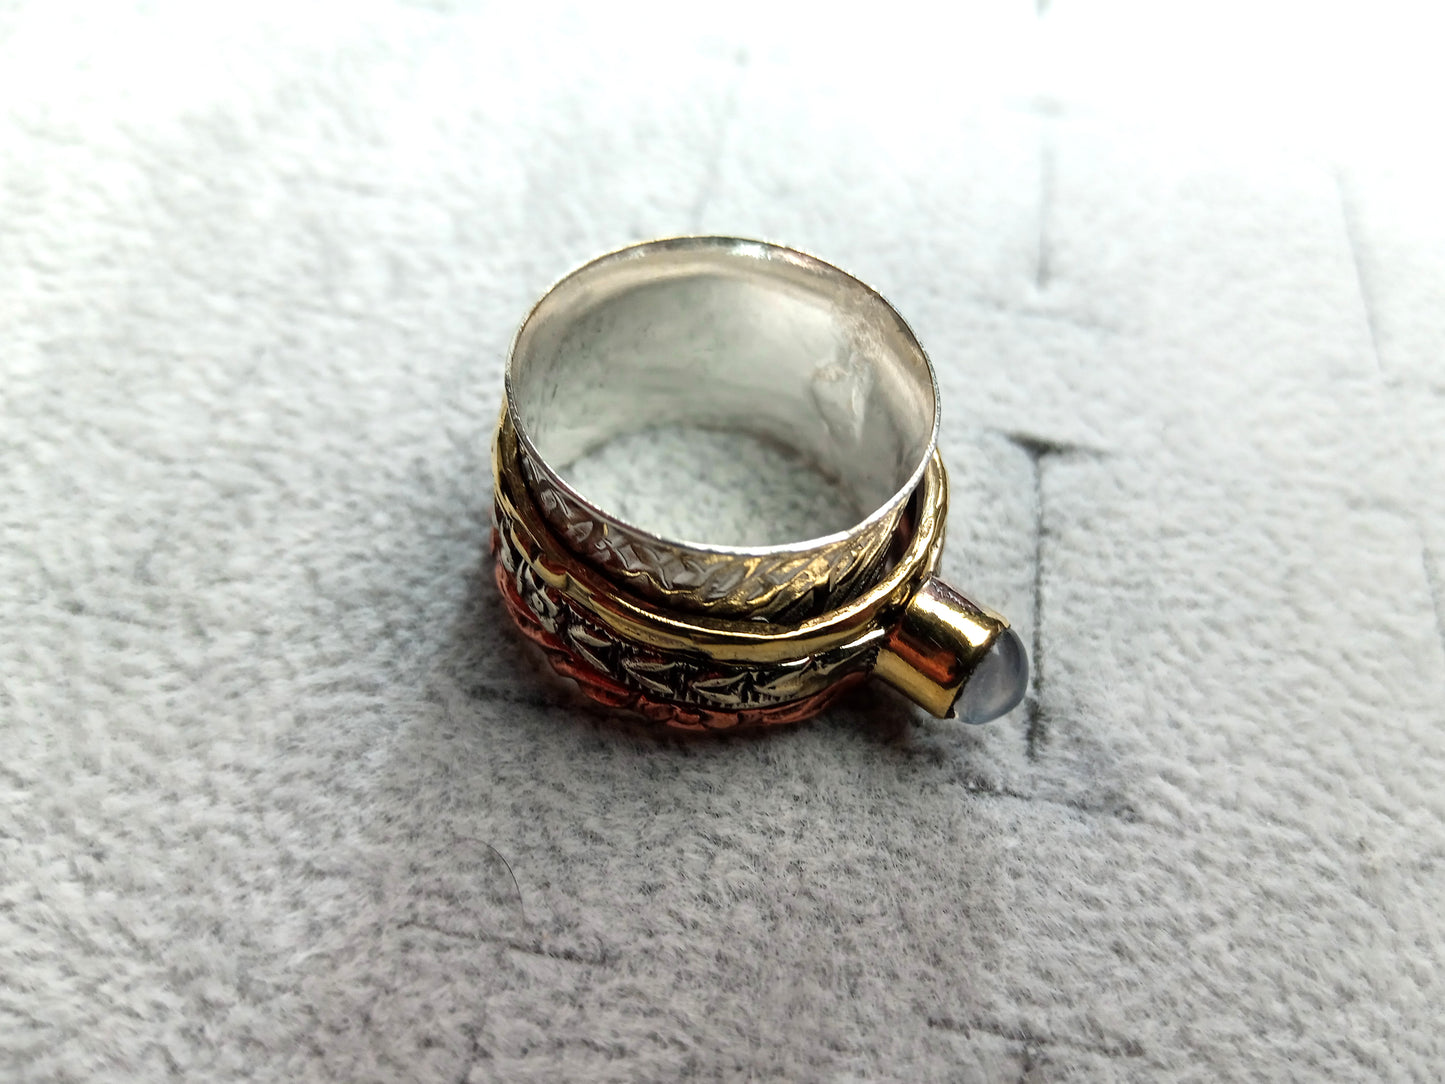 A ring with a crystal